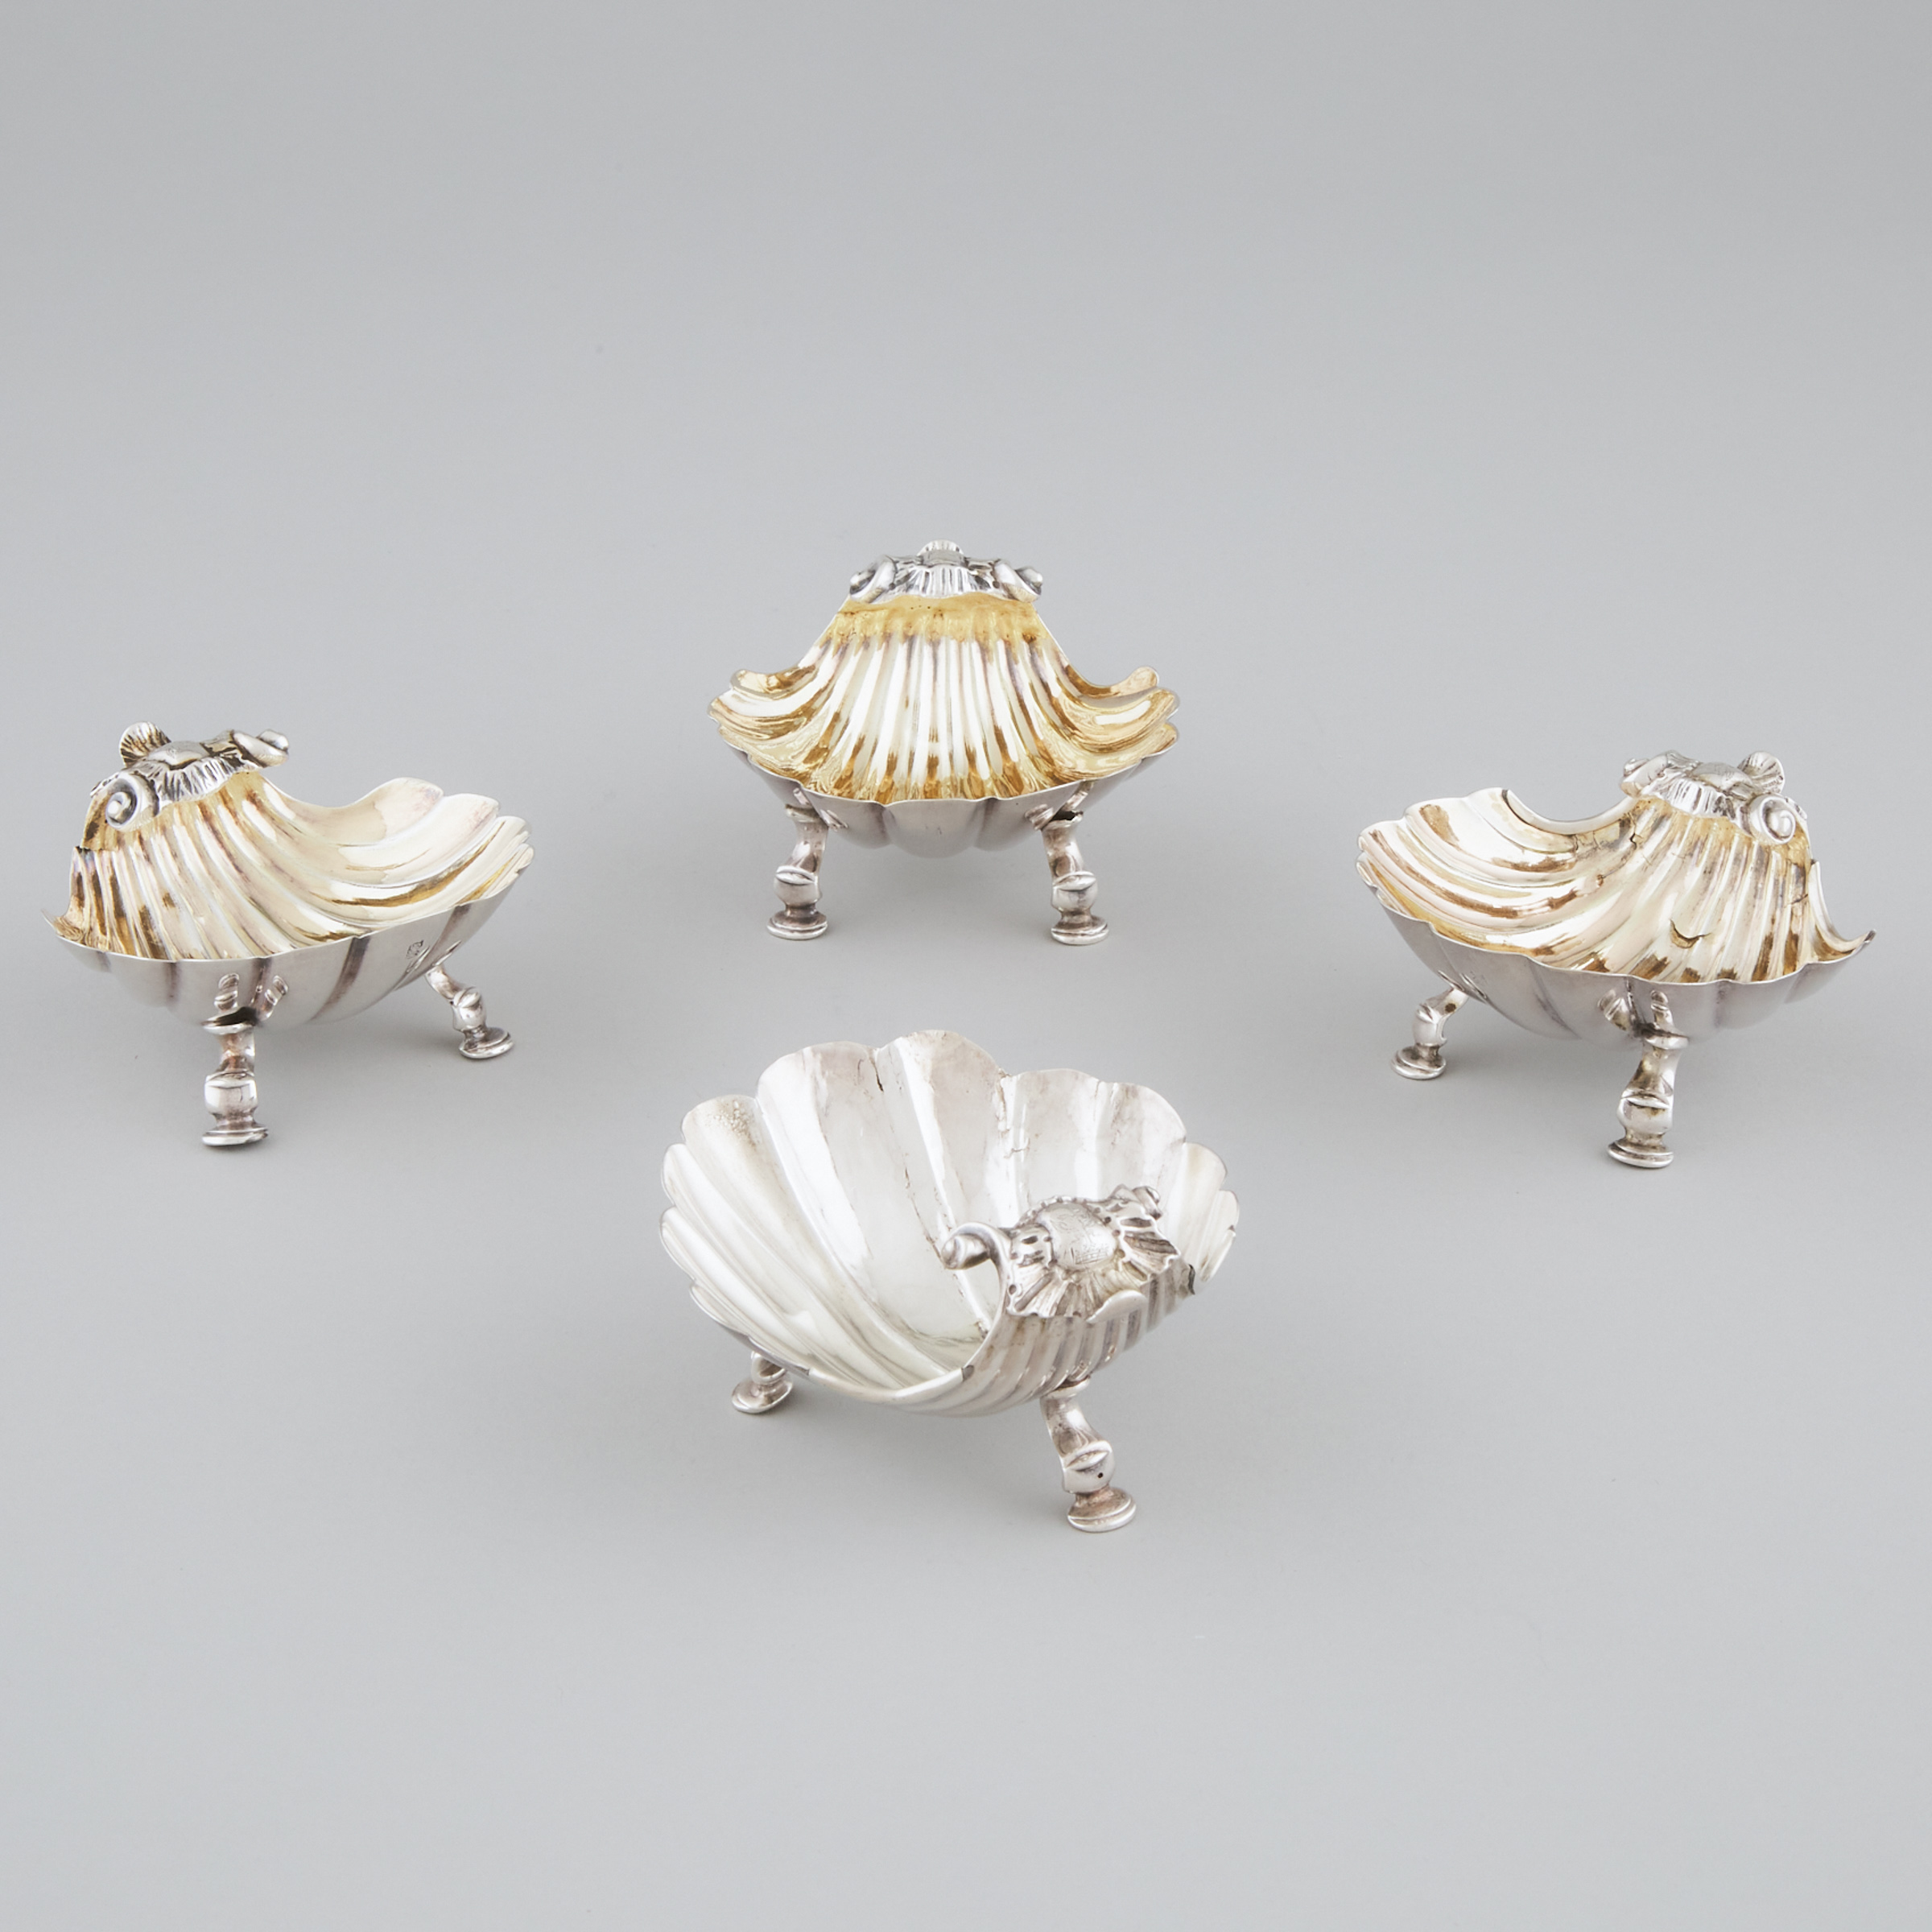 Set of Four Mid-Georgian Silver Shell Salt Cellars, possibly Provincial, c.1760